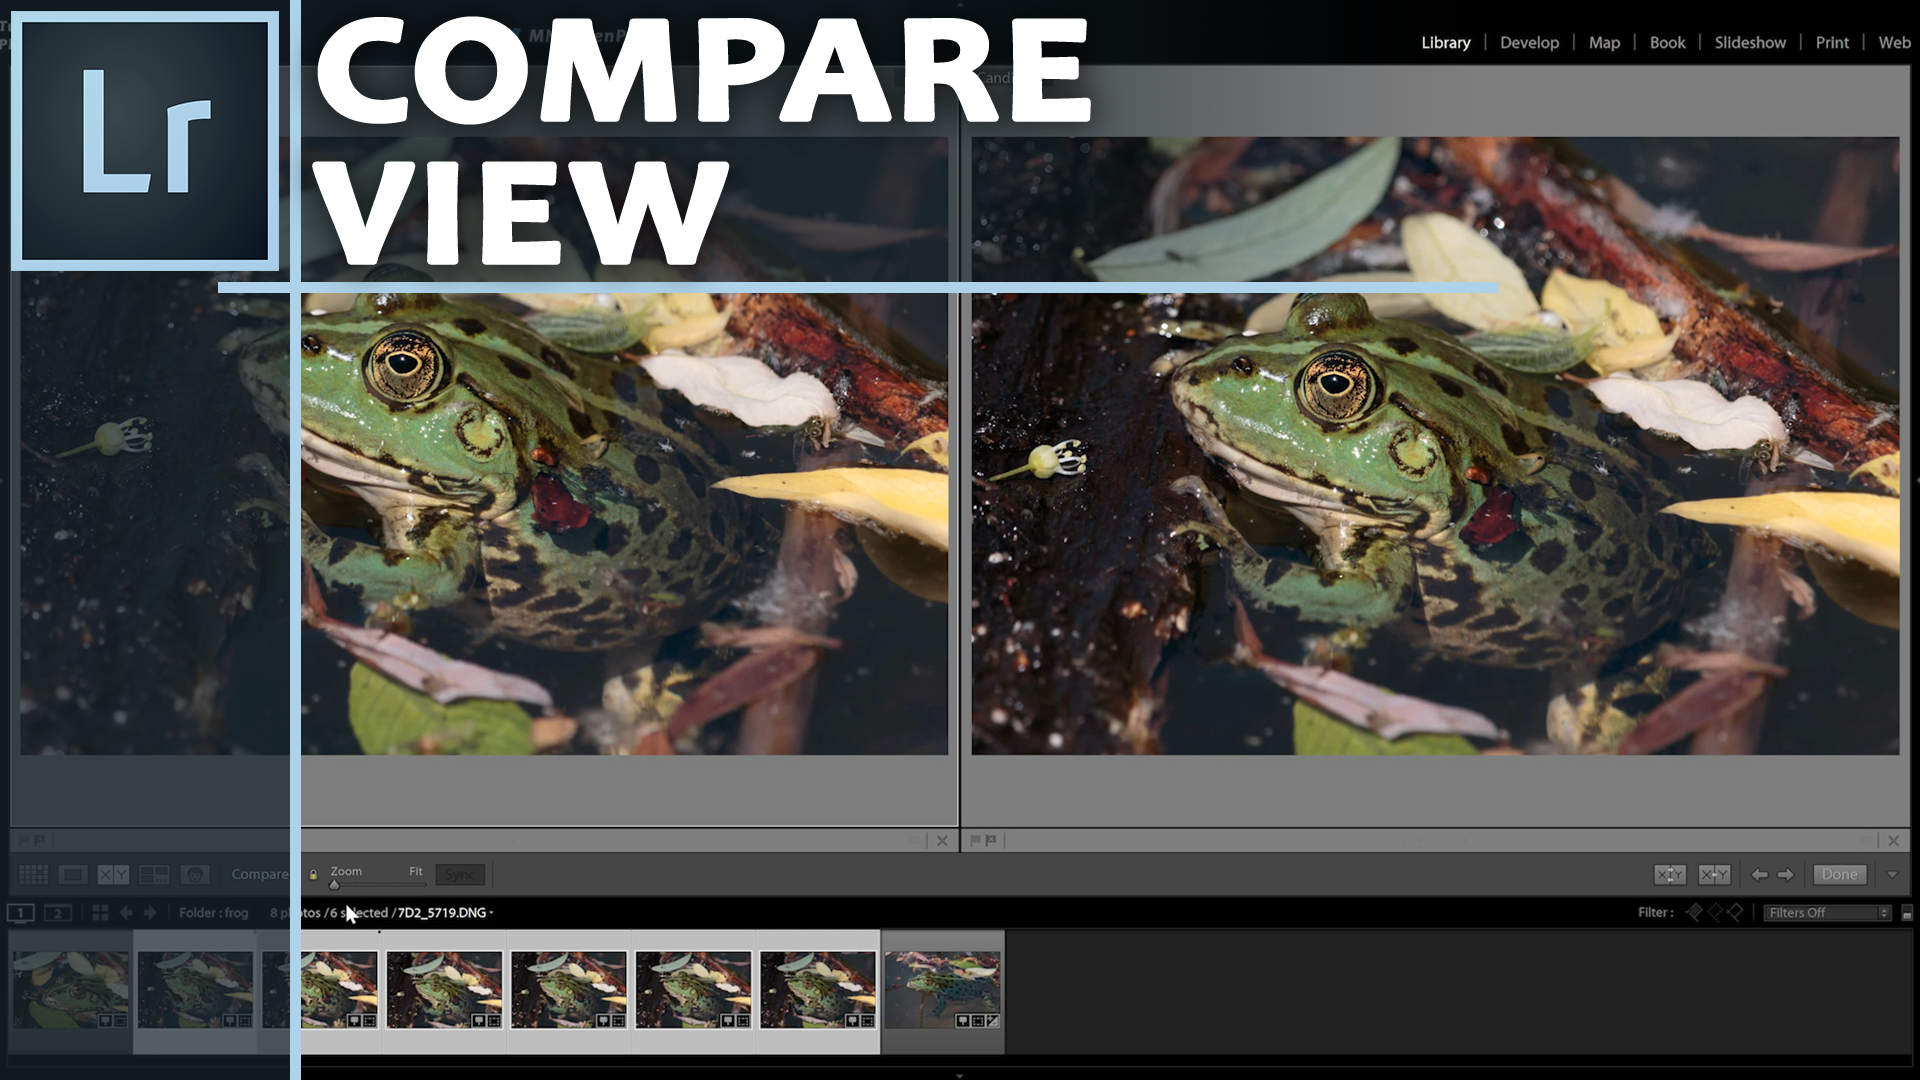 How to use Lightroom’s Compare View